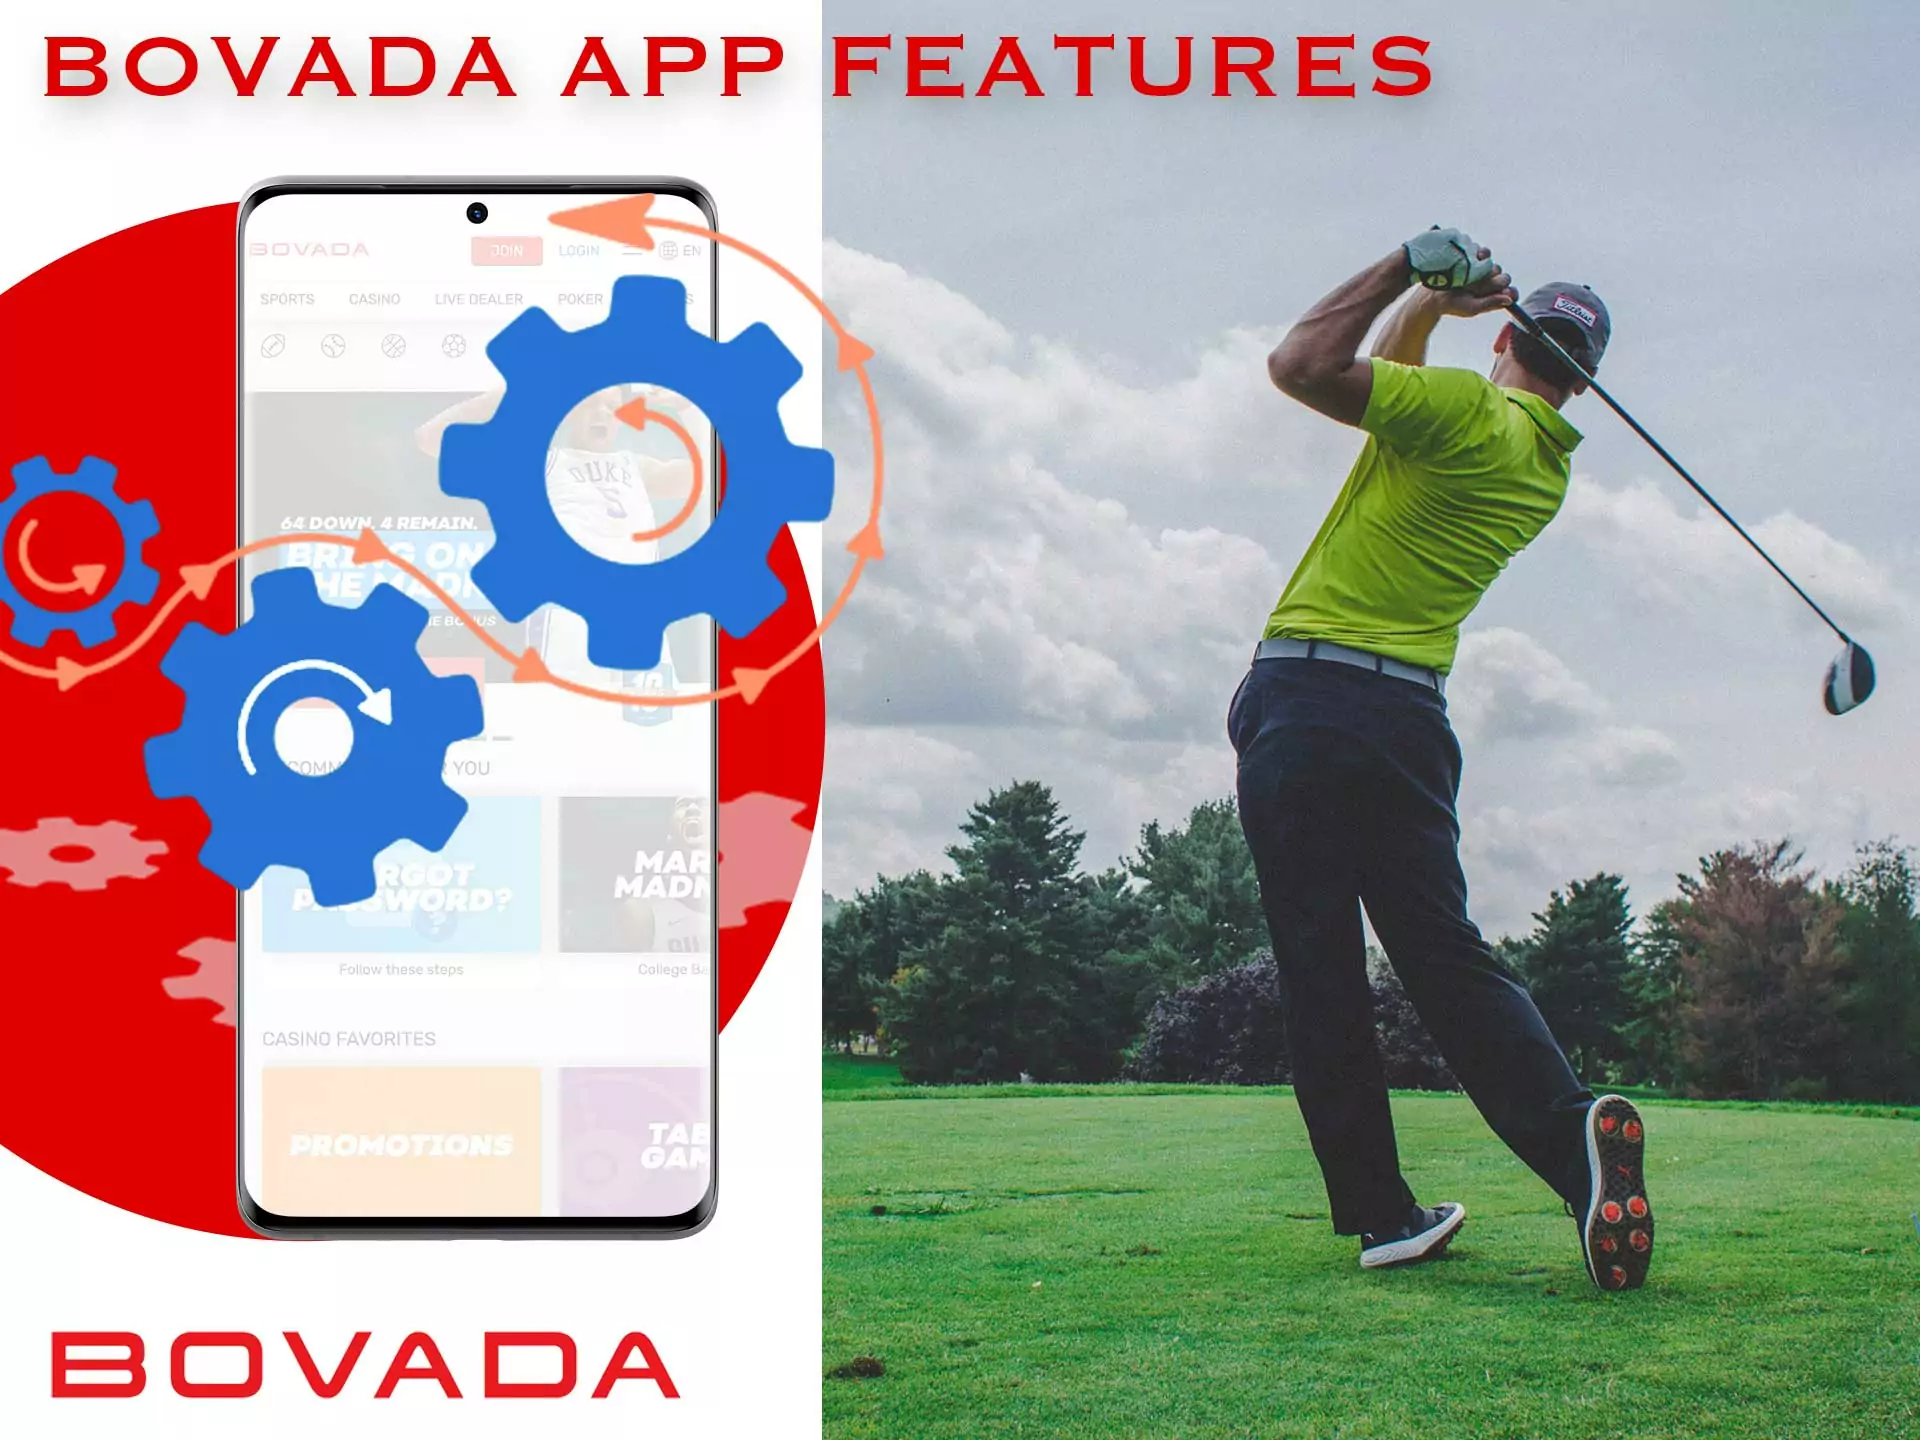 The Bovada app has features that allow you to enjoy the game more and make it easier.